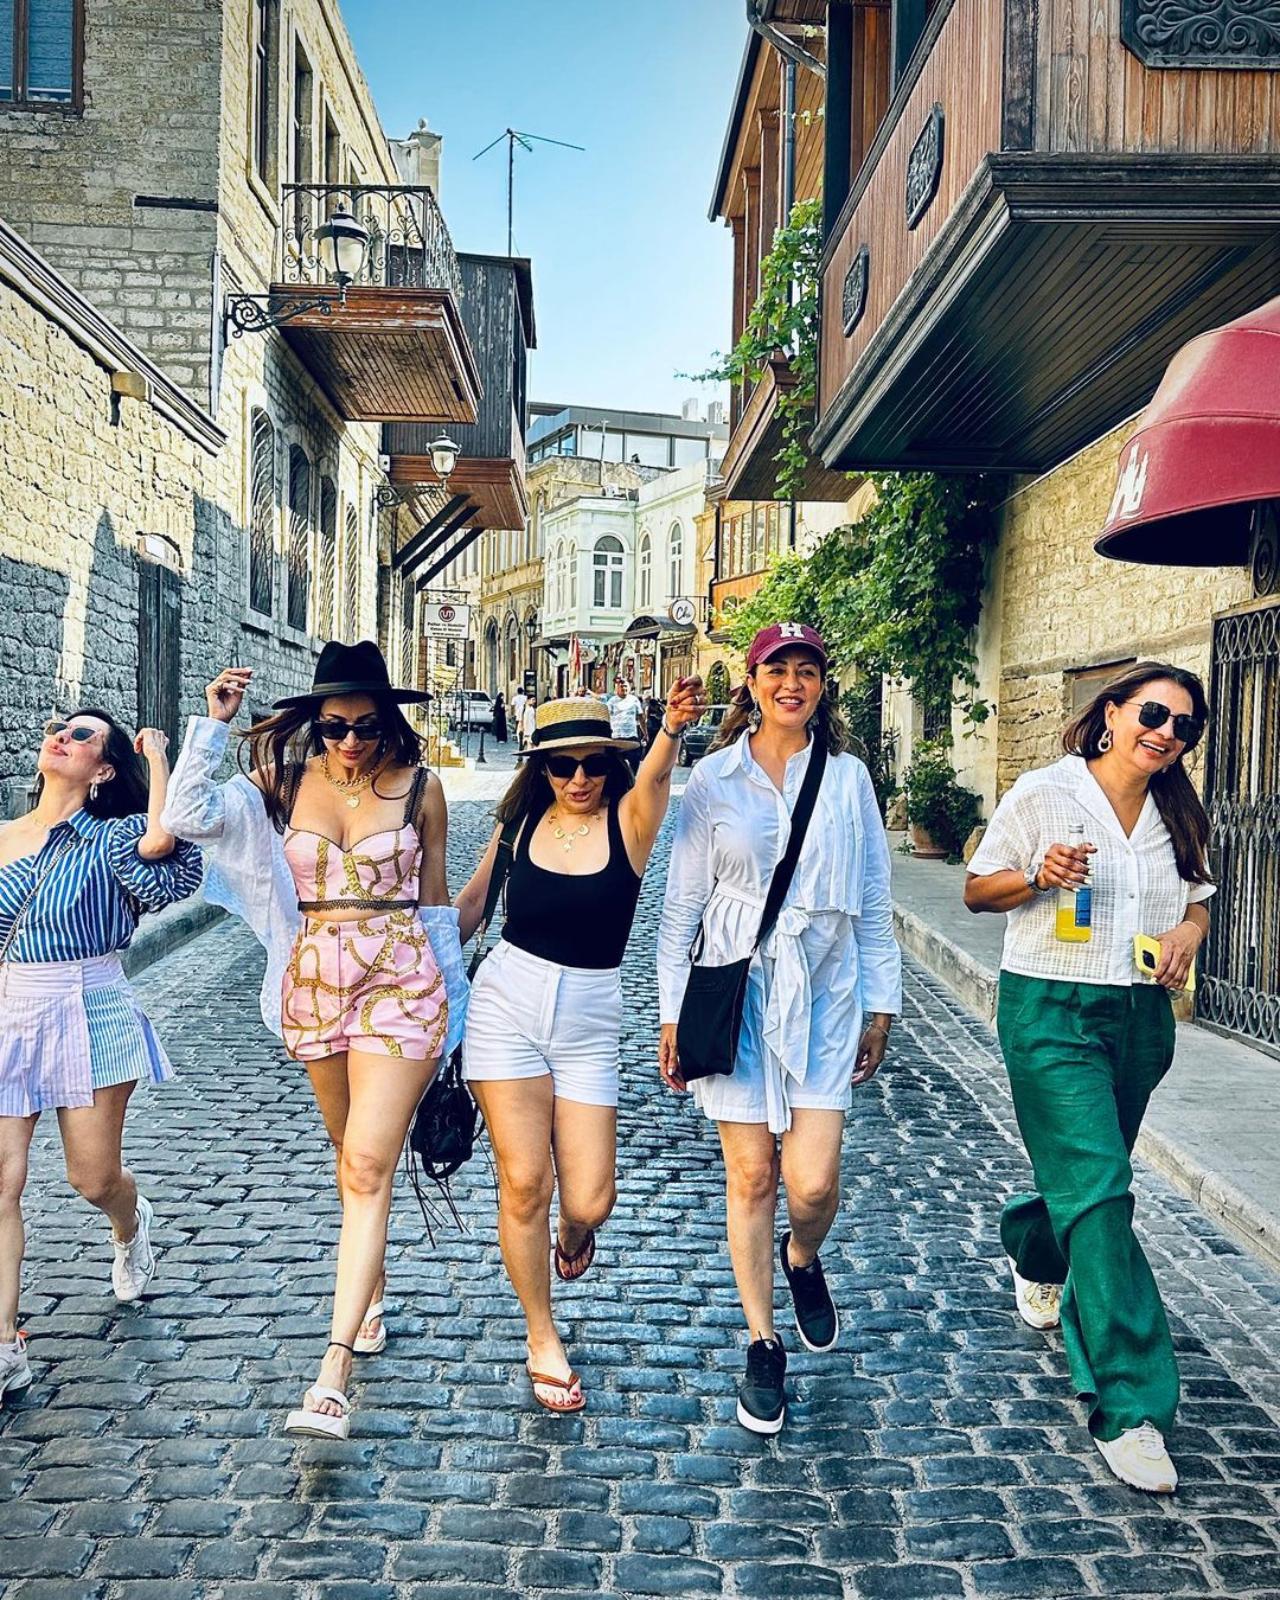 Girls' trip was officially a success! Malaika and her gang revel in their girl power this Friendship Day